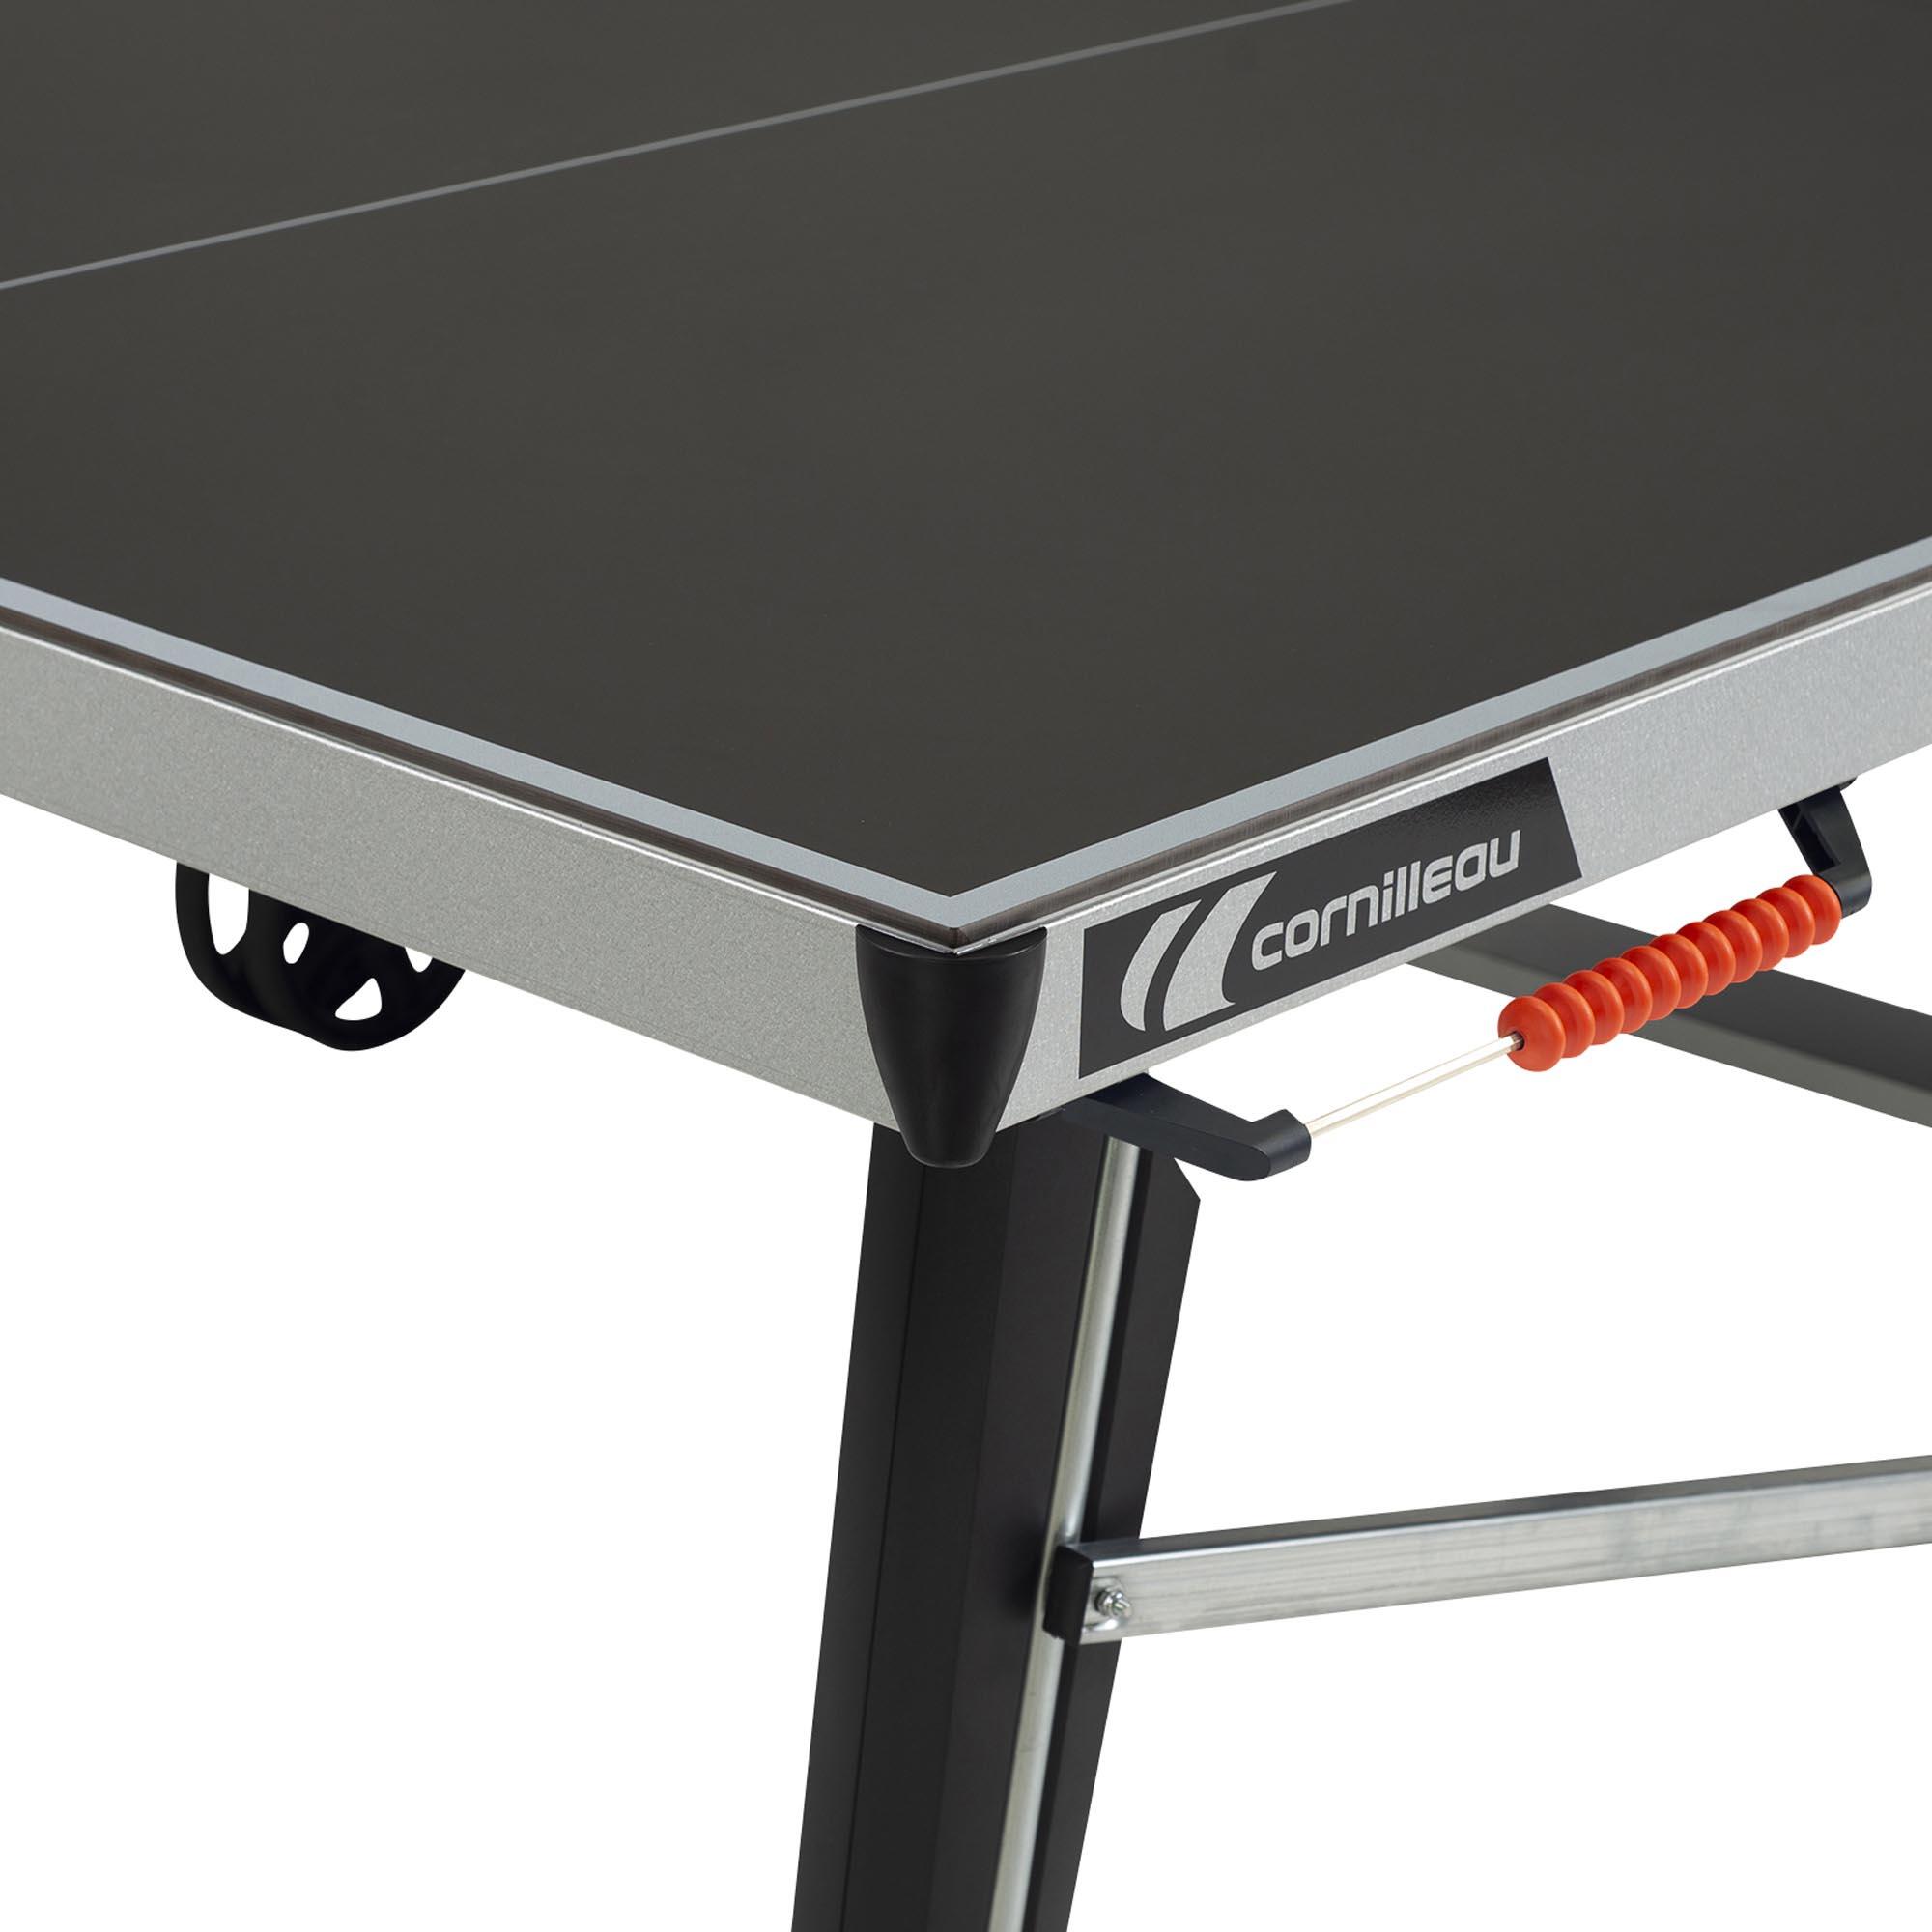 Outdoor Table Tennis Table 600X - Black 6/23